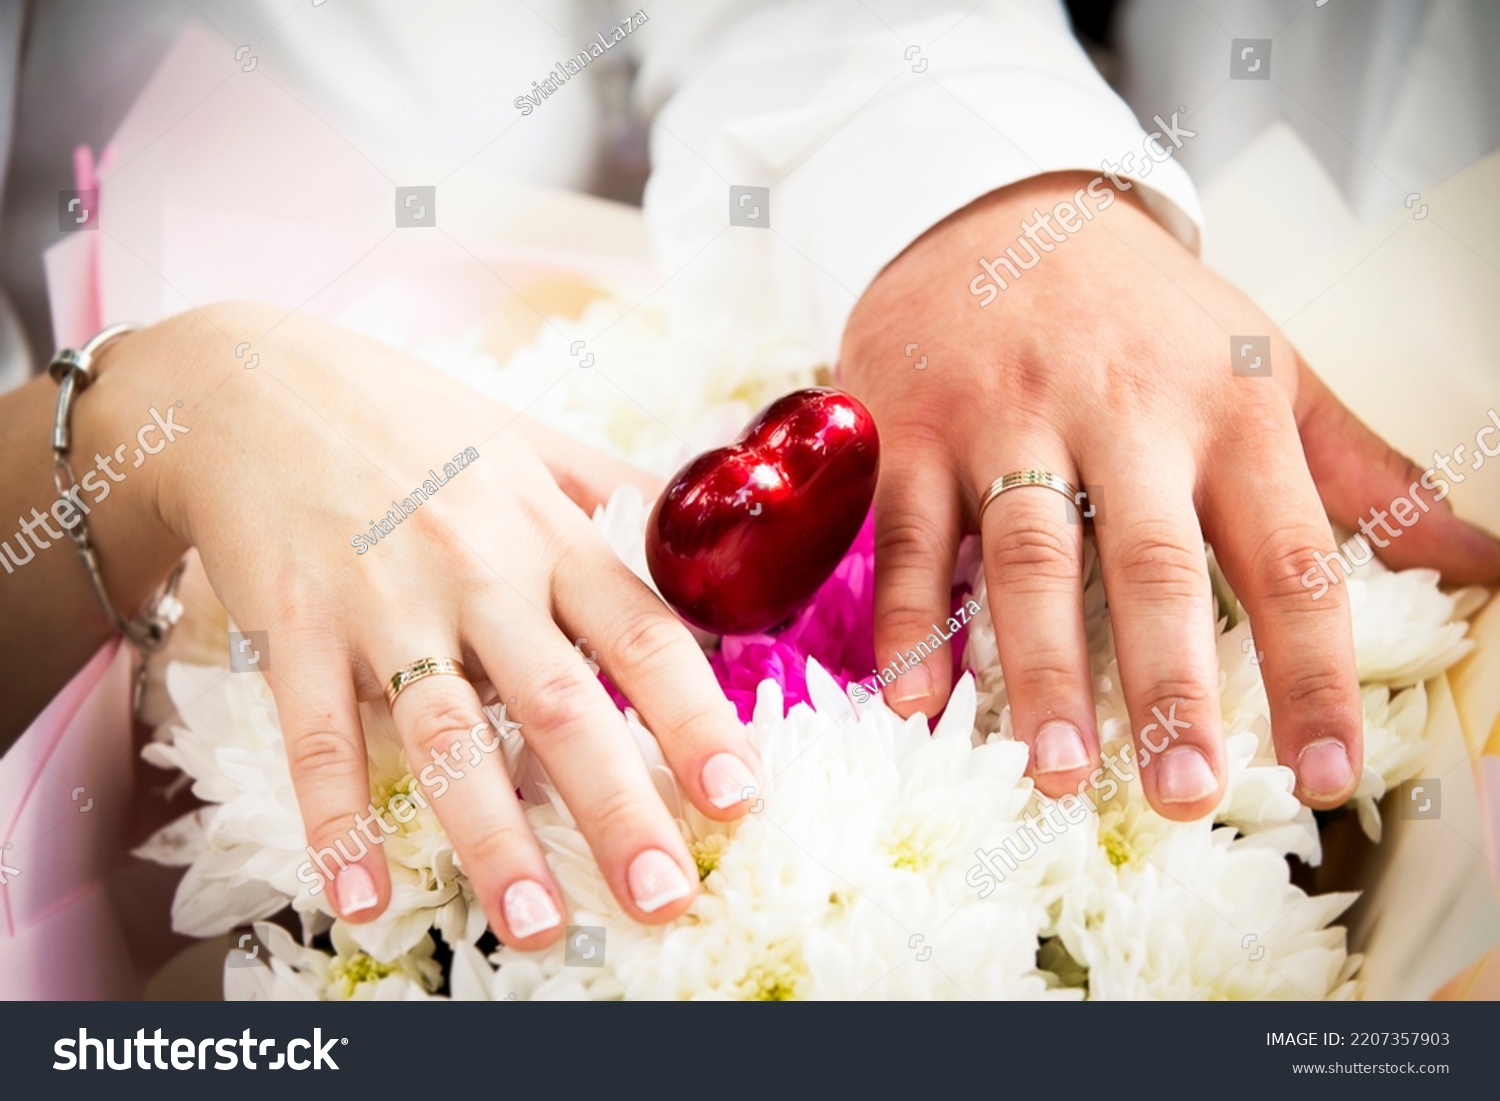 Hands of lovers with wedding rings. Wedding day of a heterogeneous couple. #2207357903